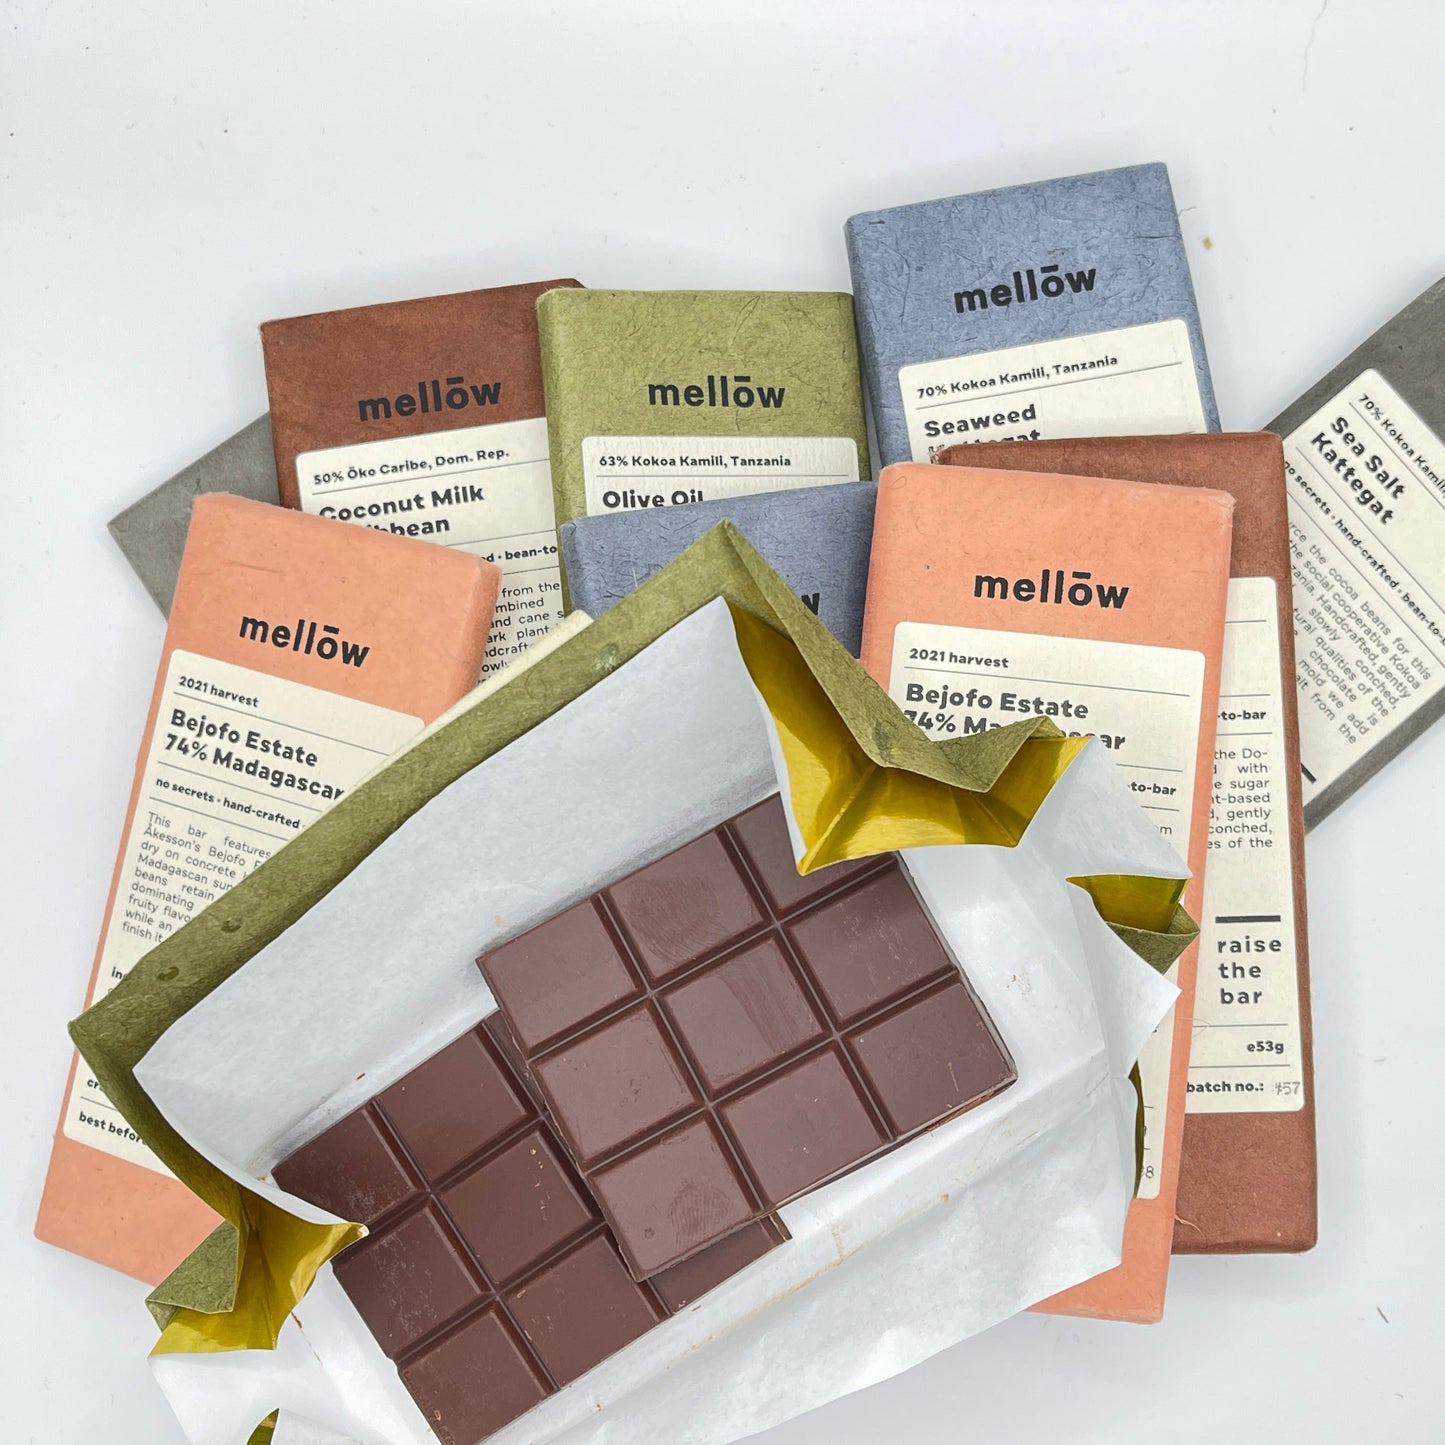 Danish Chocolate by Mellow OLIVE OIL ALENTEJO PORTUGAL